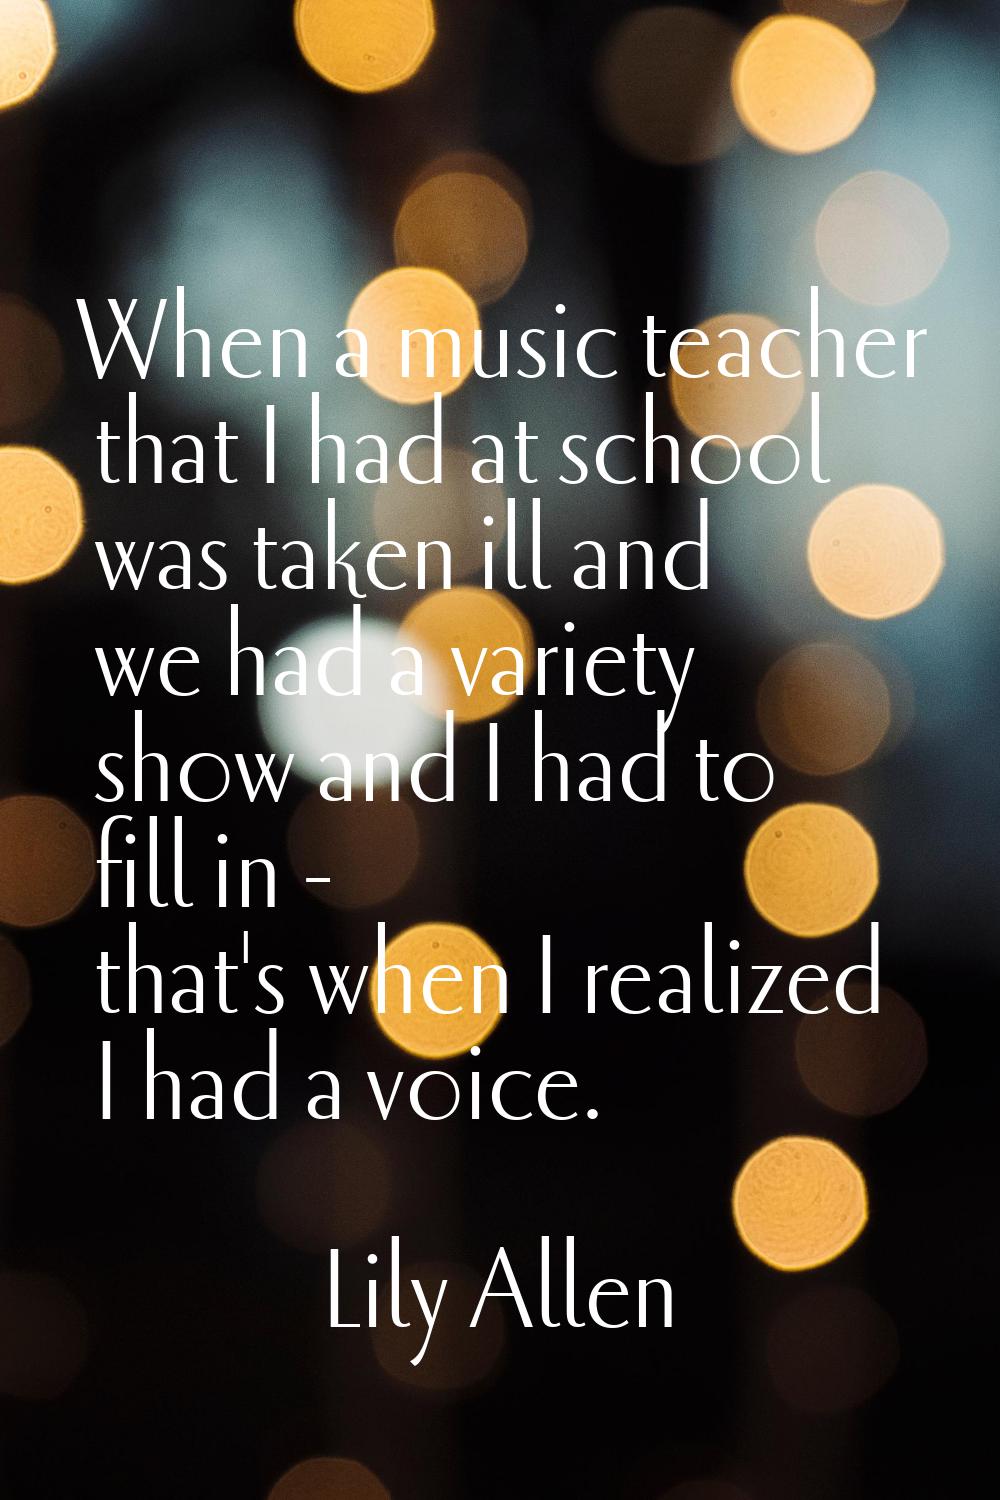 When a music teacher that I had at school was taken ill and we had a variety show and I had to fill